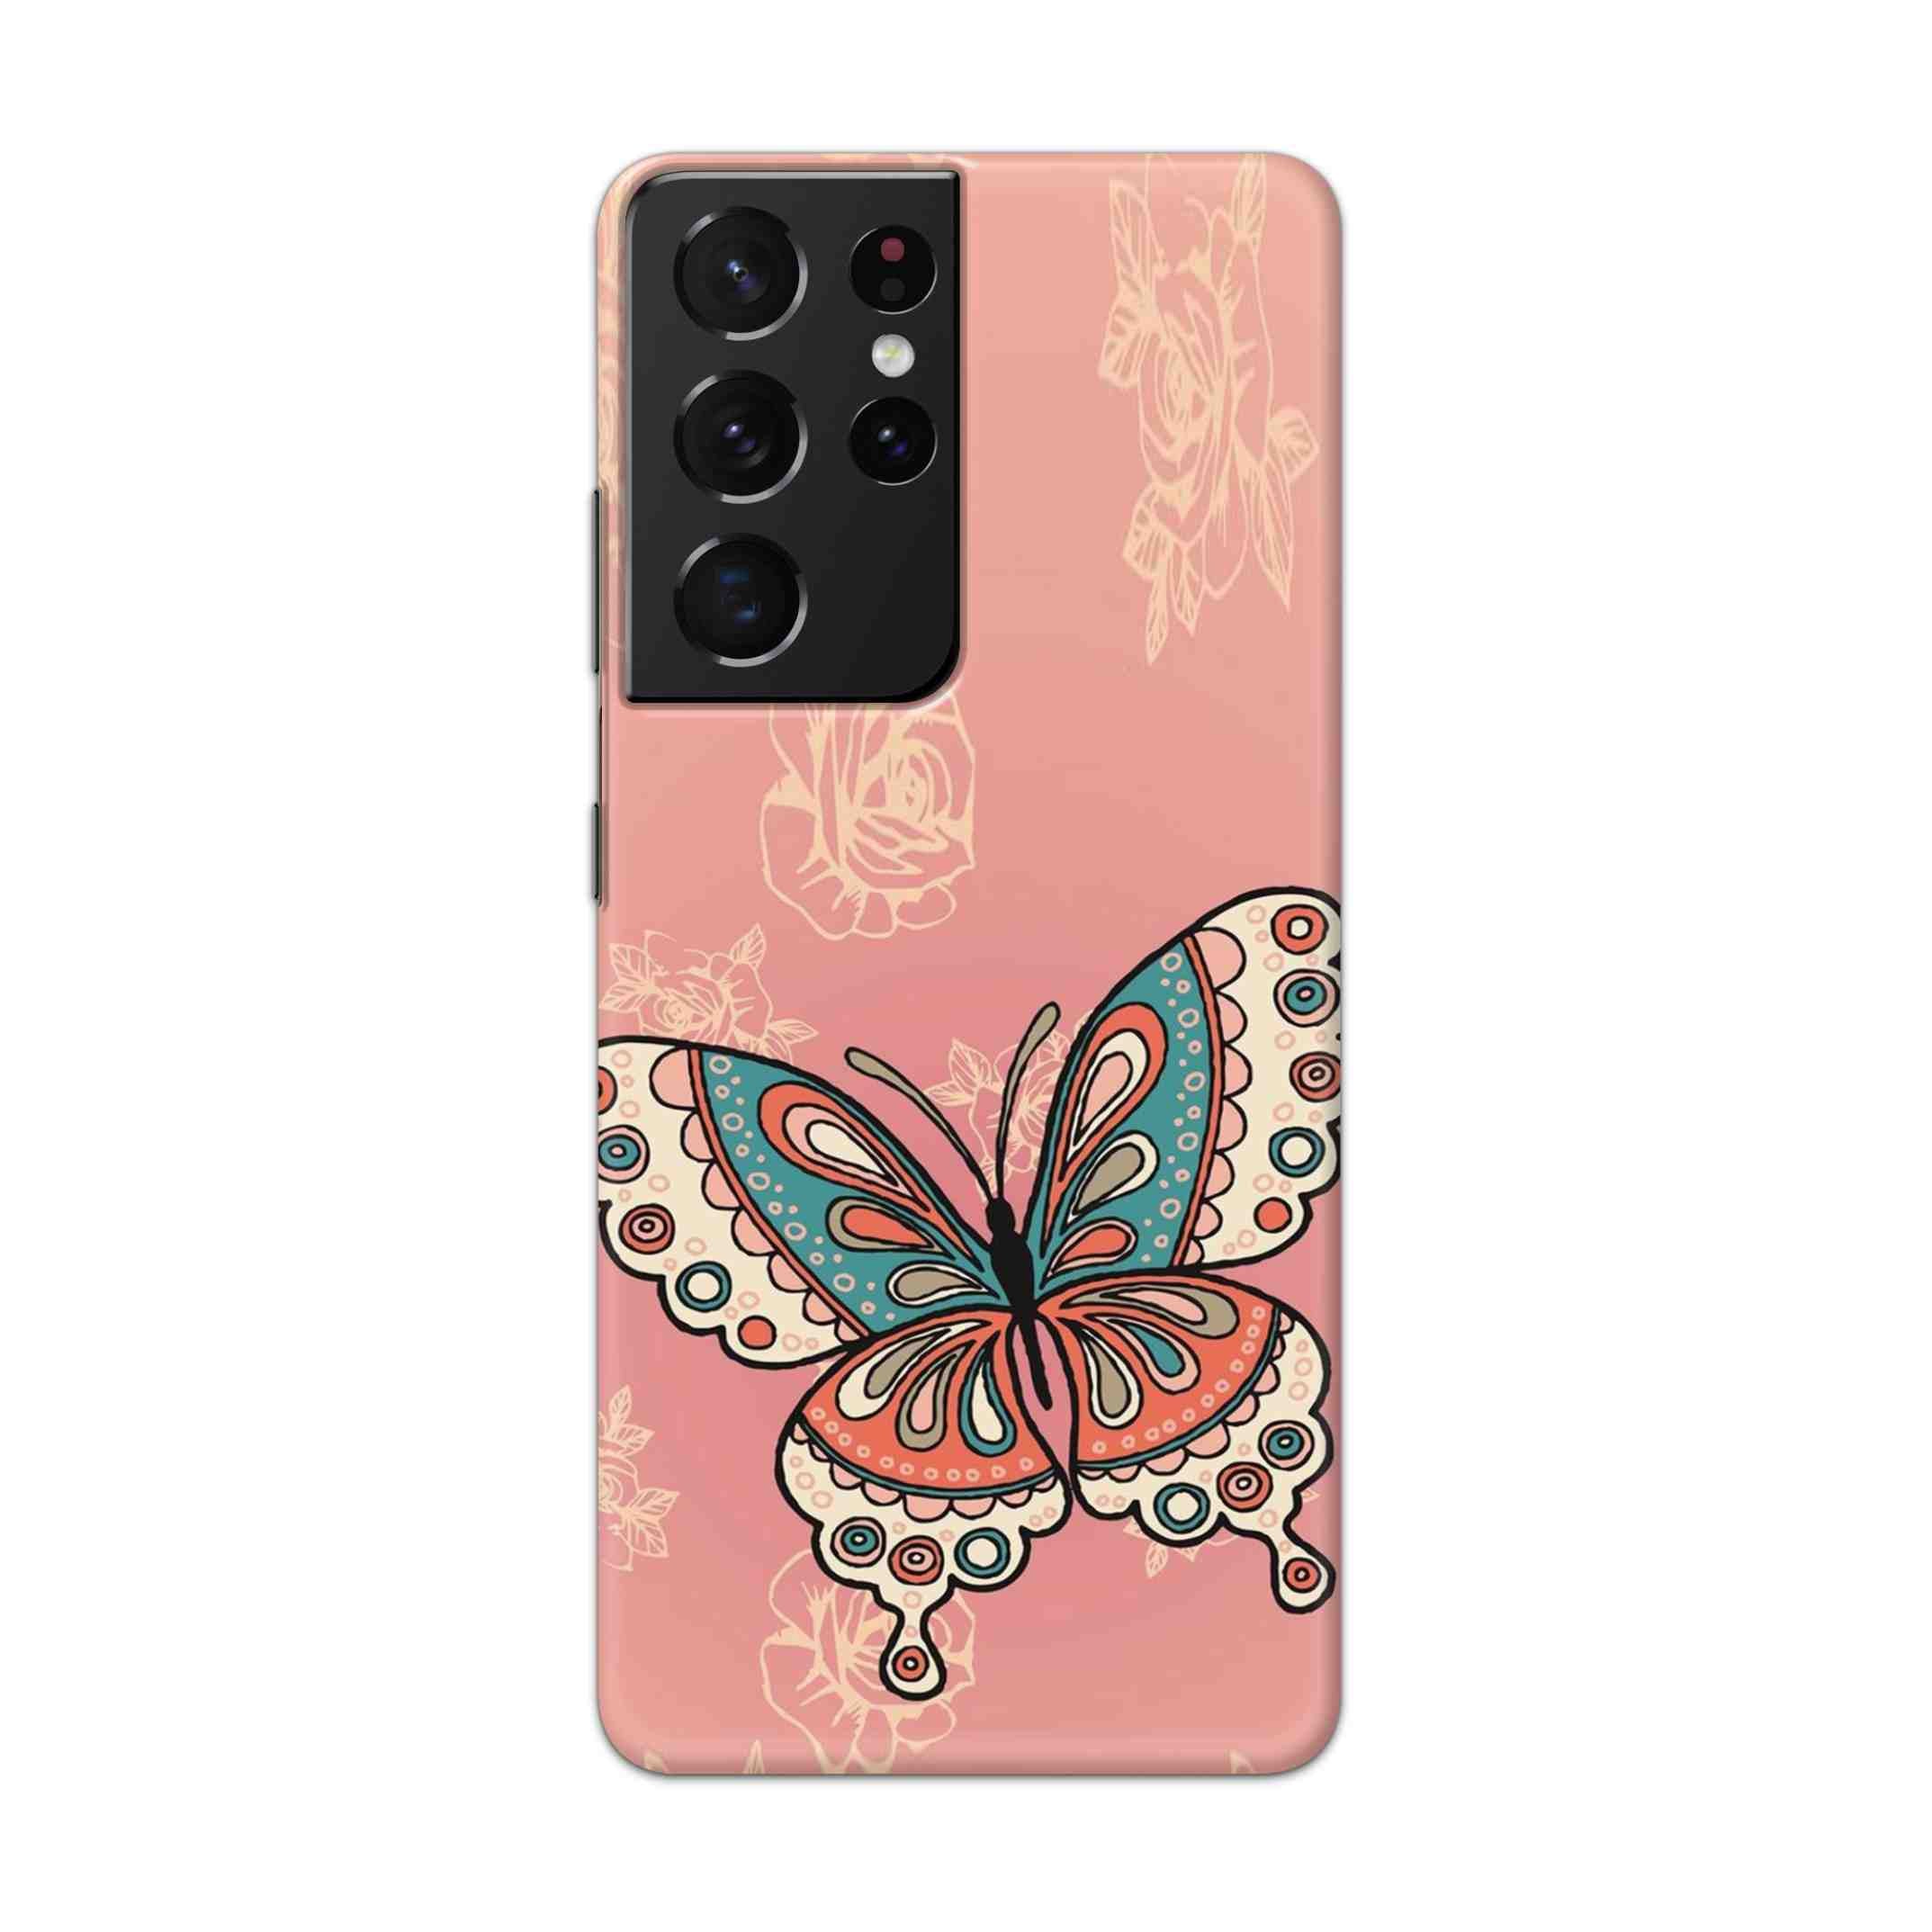 Buy Butterfly Hard Back Mobile Phone Case Cover For Samsung Galaxy S21 Ultra Online